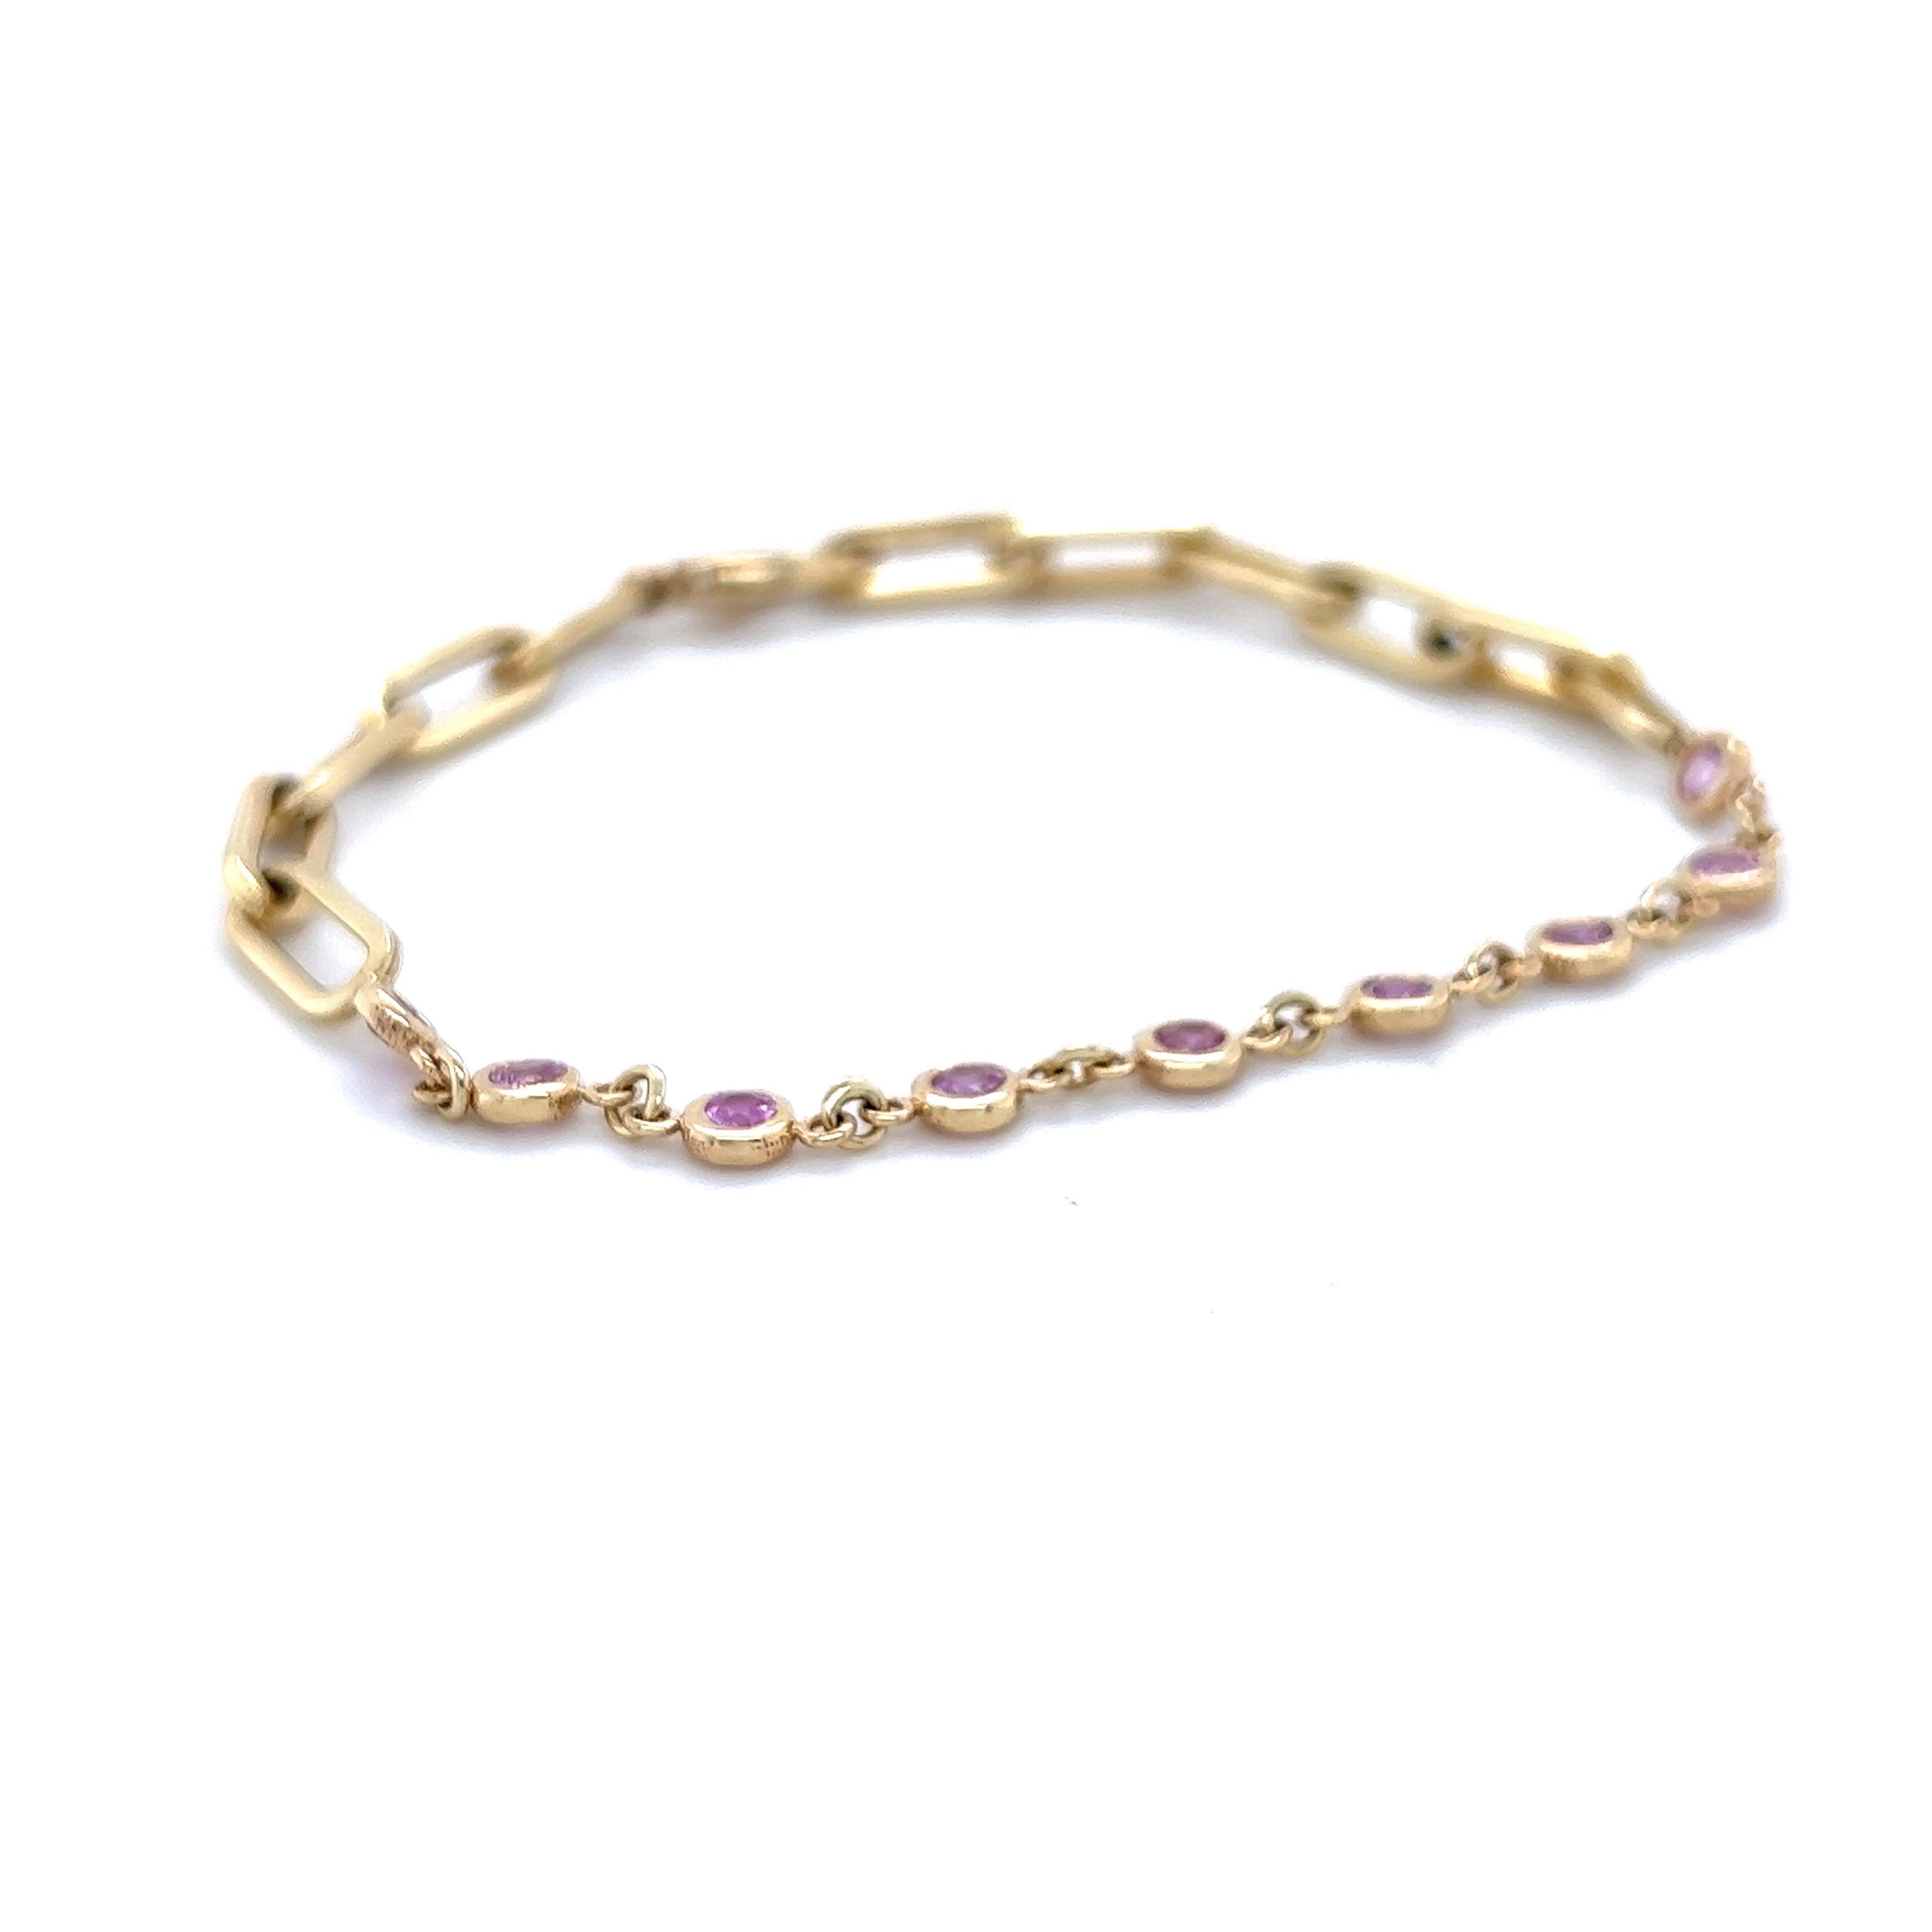 This bracelet has 0.93 carats of Natural Round Cut Pink Sapphires and is approximately 7.5 inches long. 

It is set in 14 Karat Yellow Gold and weighs approximately 5.9 grams

